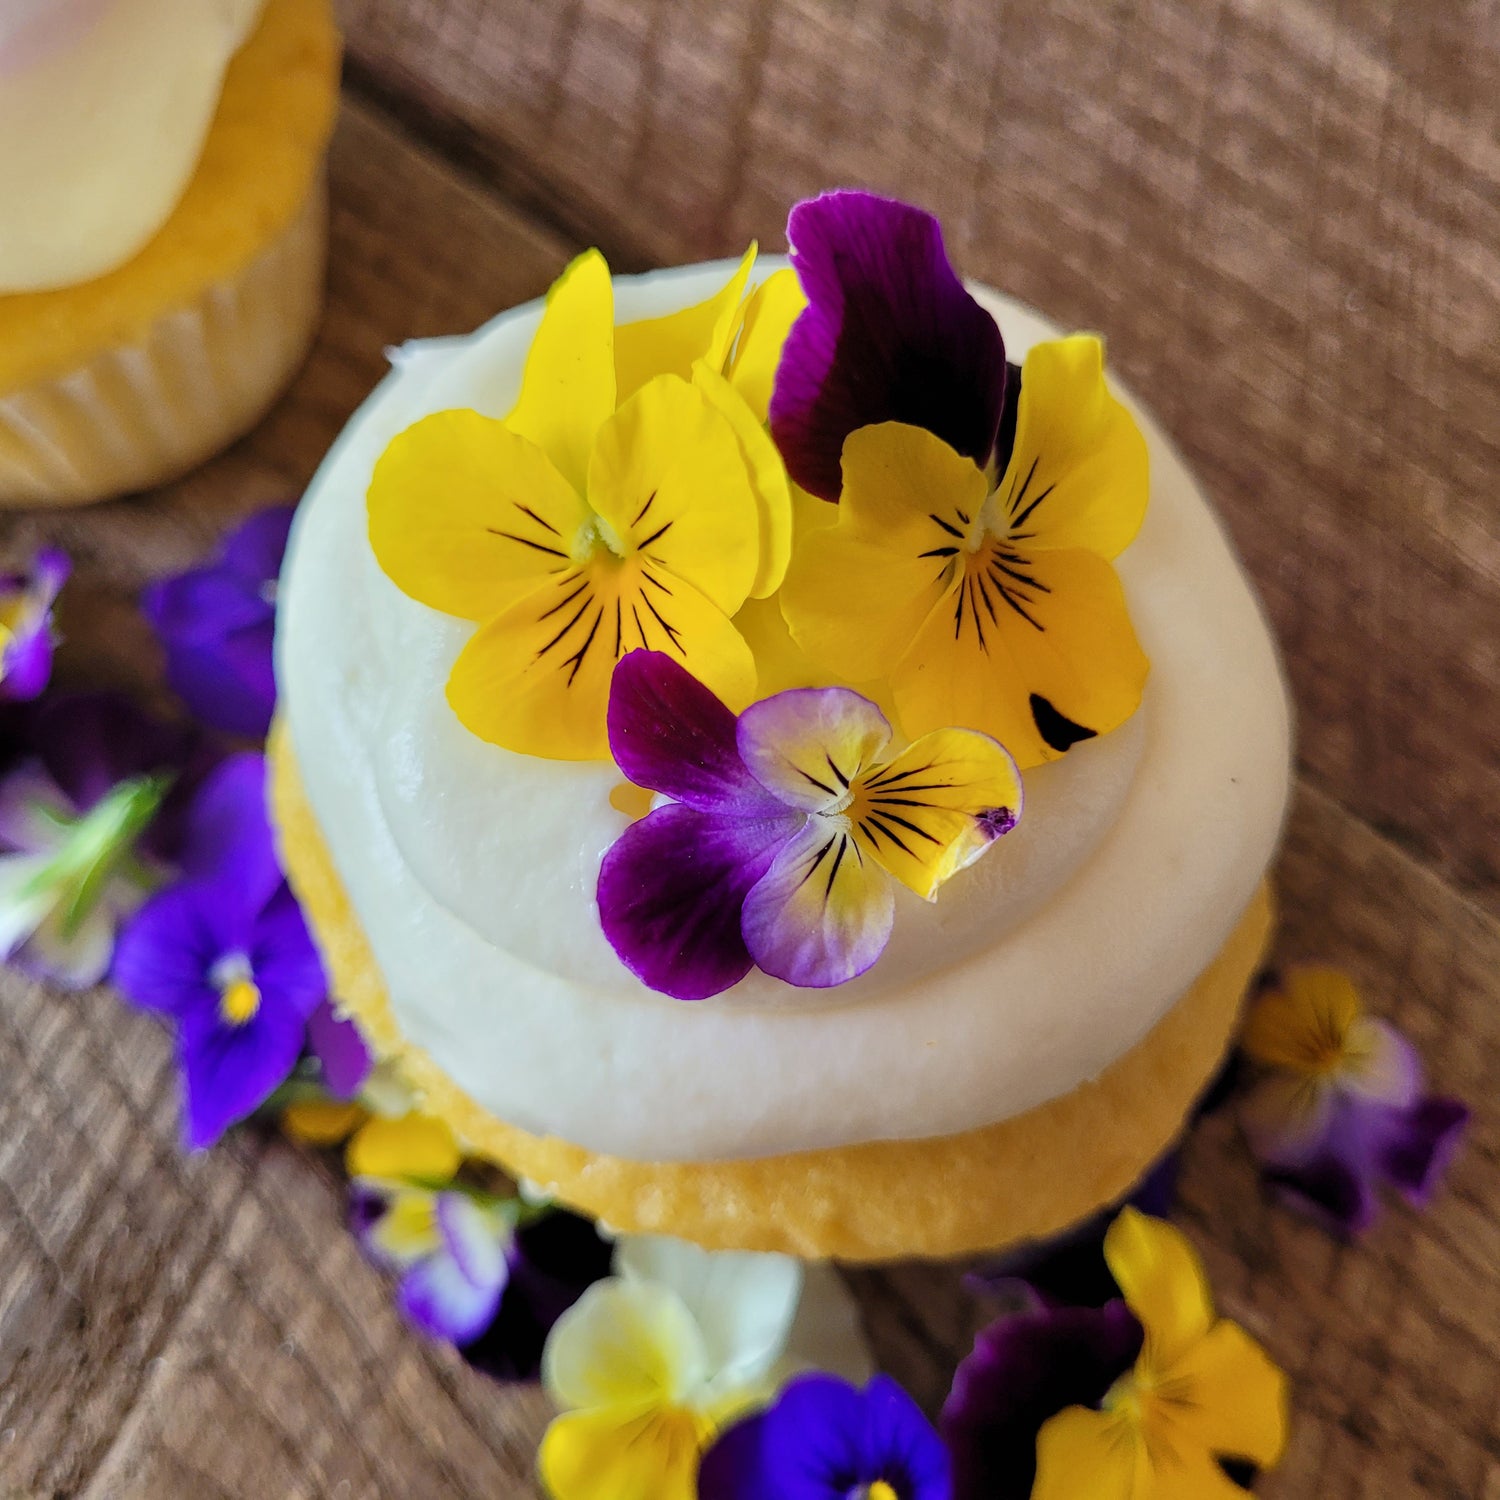 33 Edible Flower Cakes That're Simple But Outstanding : Freeze-Dried  Organic Flowers